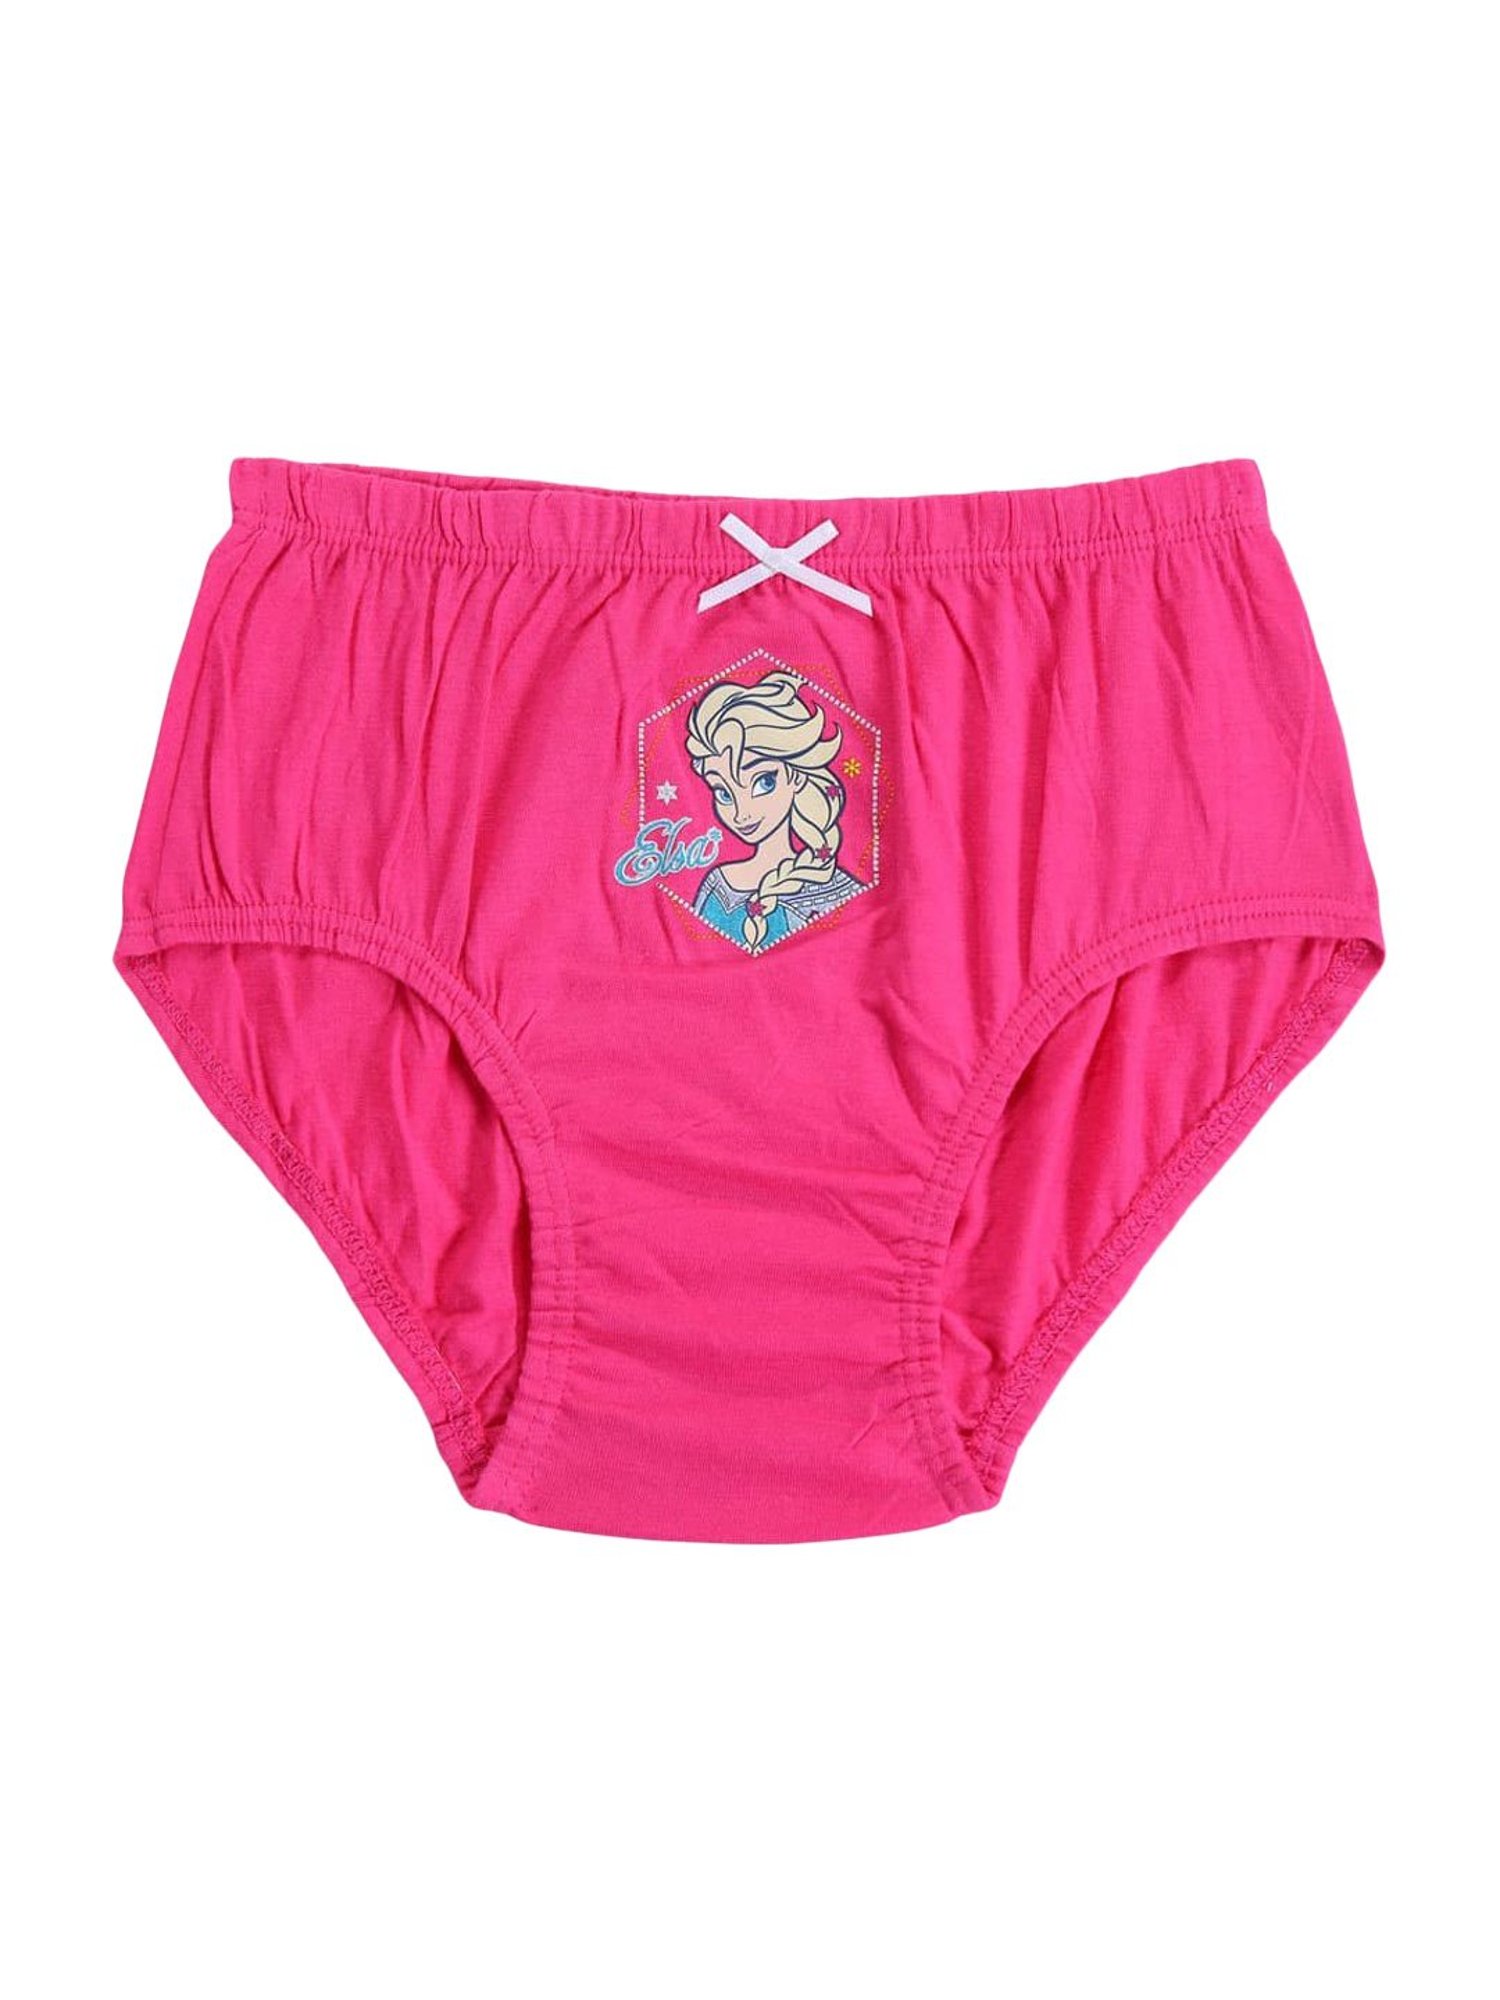 Buy Bodycare Kids Assorted Solid Panty (Pack Of 6) for Girls Clothing  Online @ Tata CLiQ